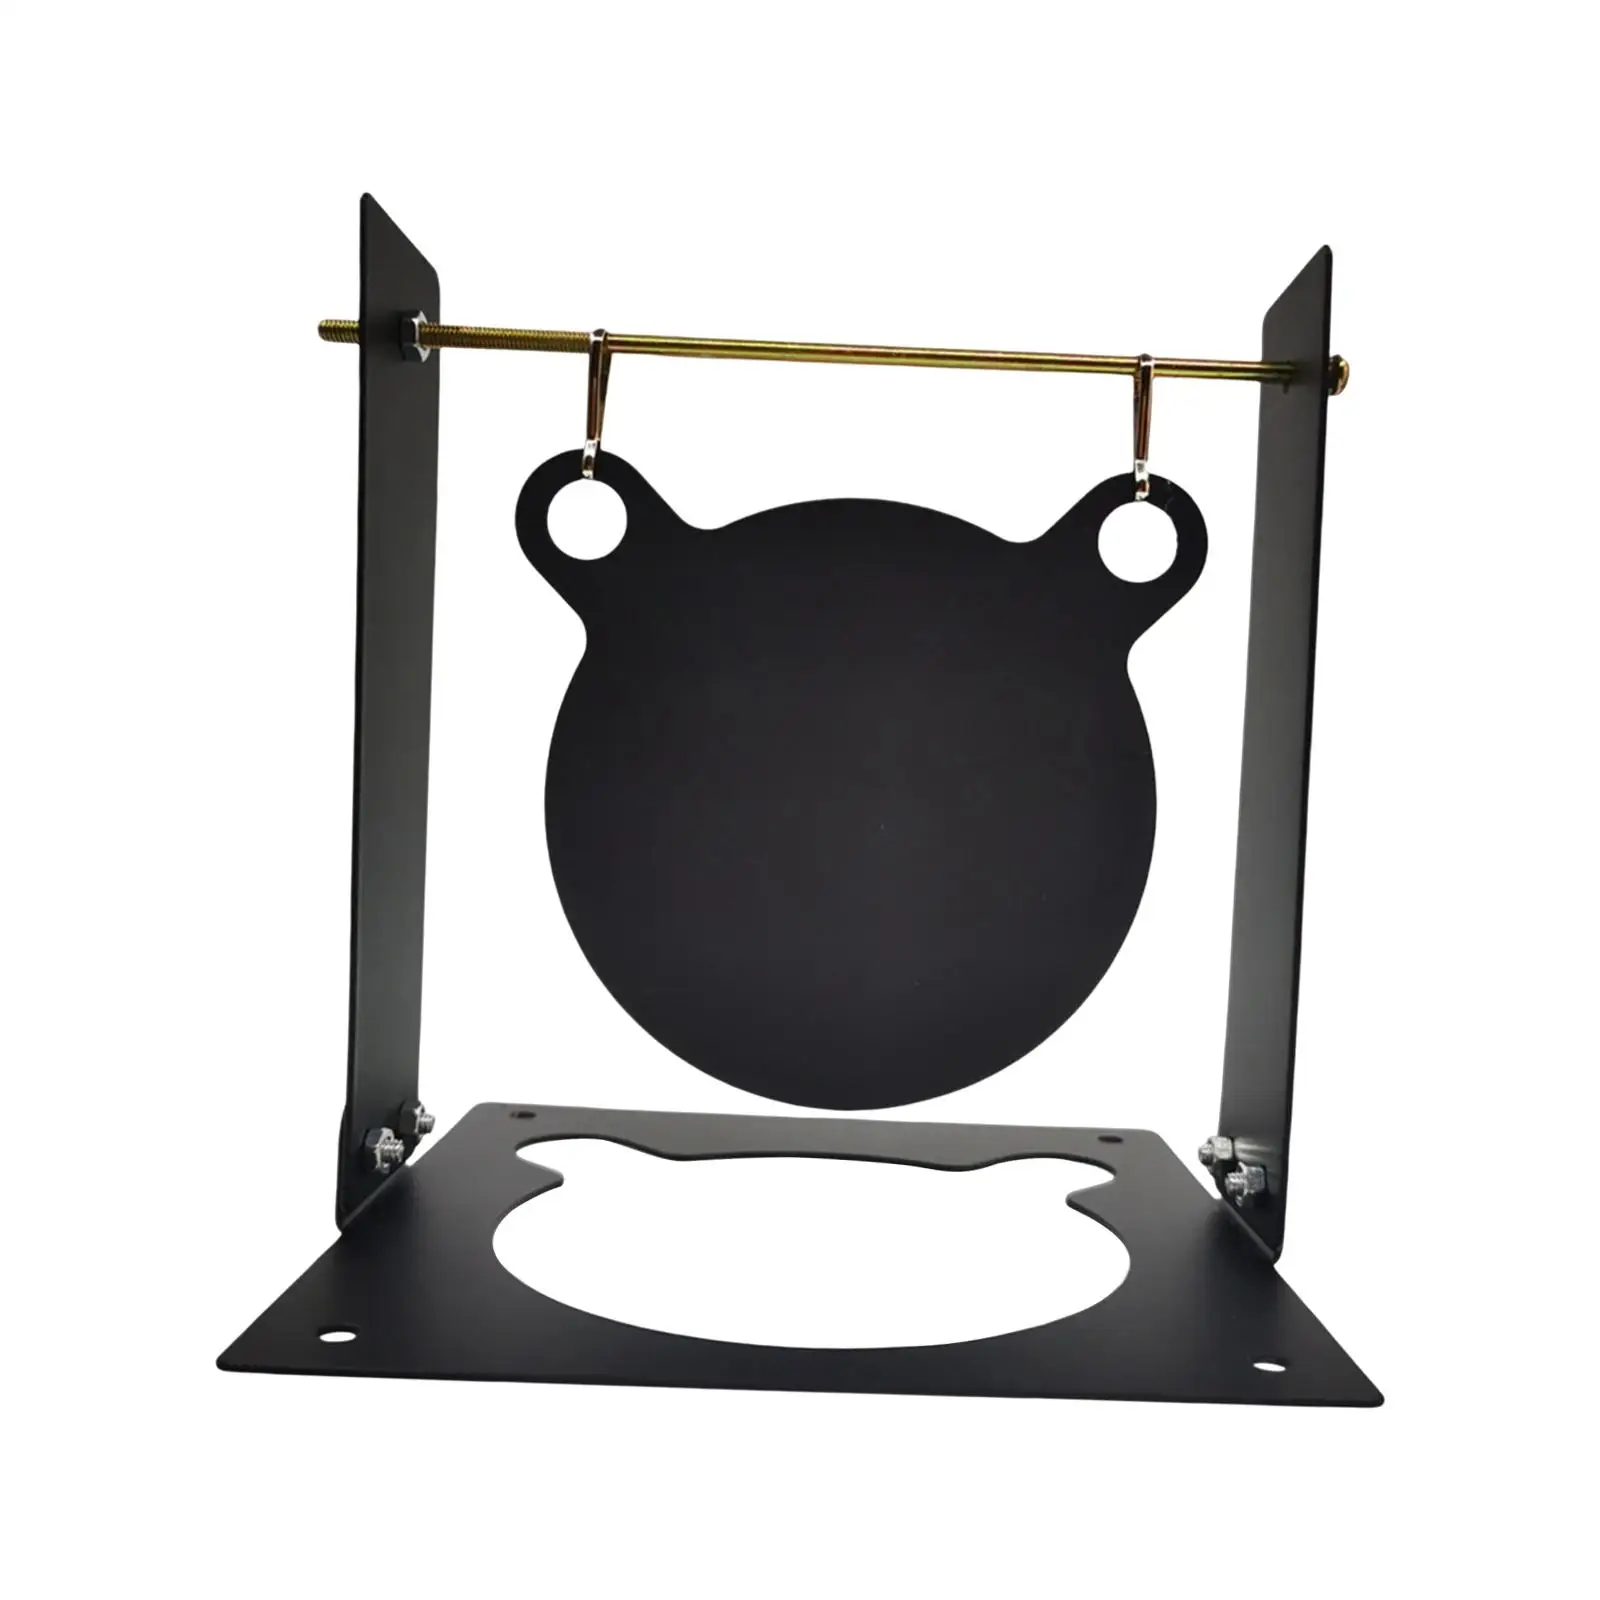 Portable Trainer Target Outdoor Sports Toy Target for Adults Teens